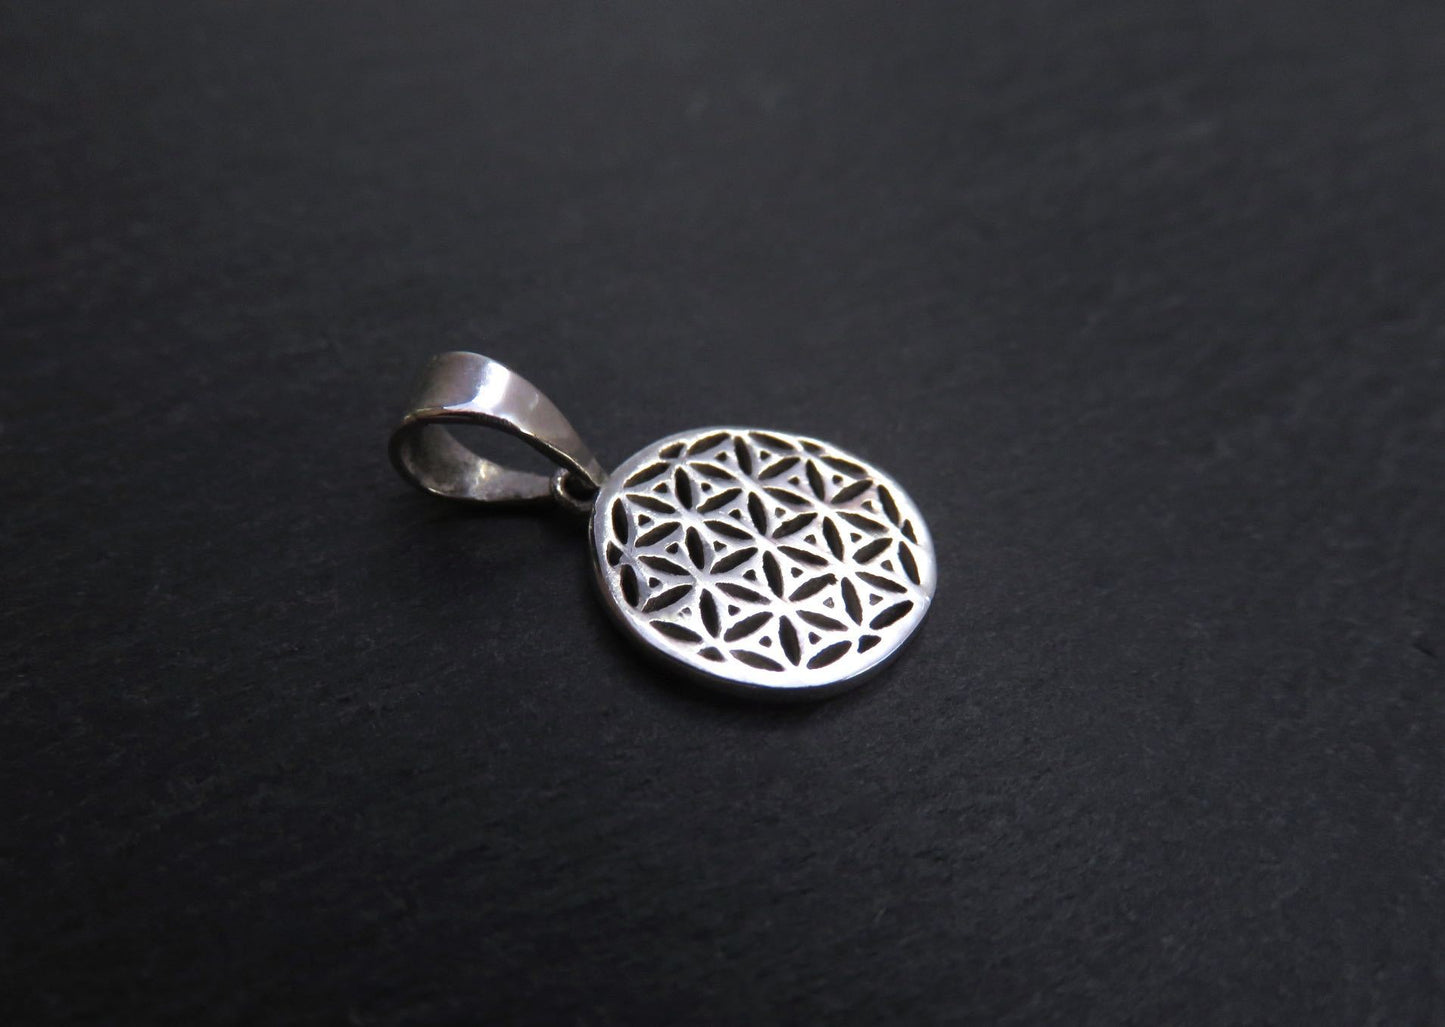 Necklace with the motif of the flower of life made of silver 